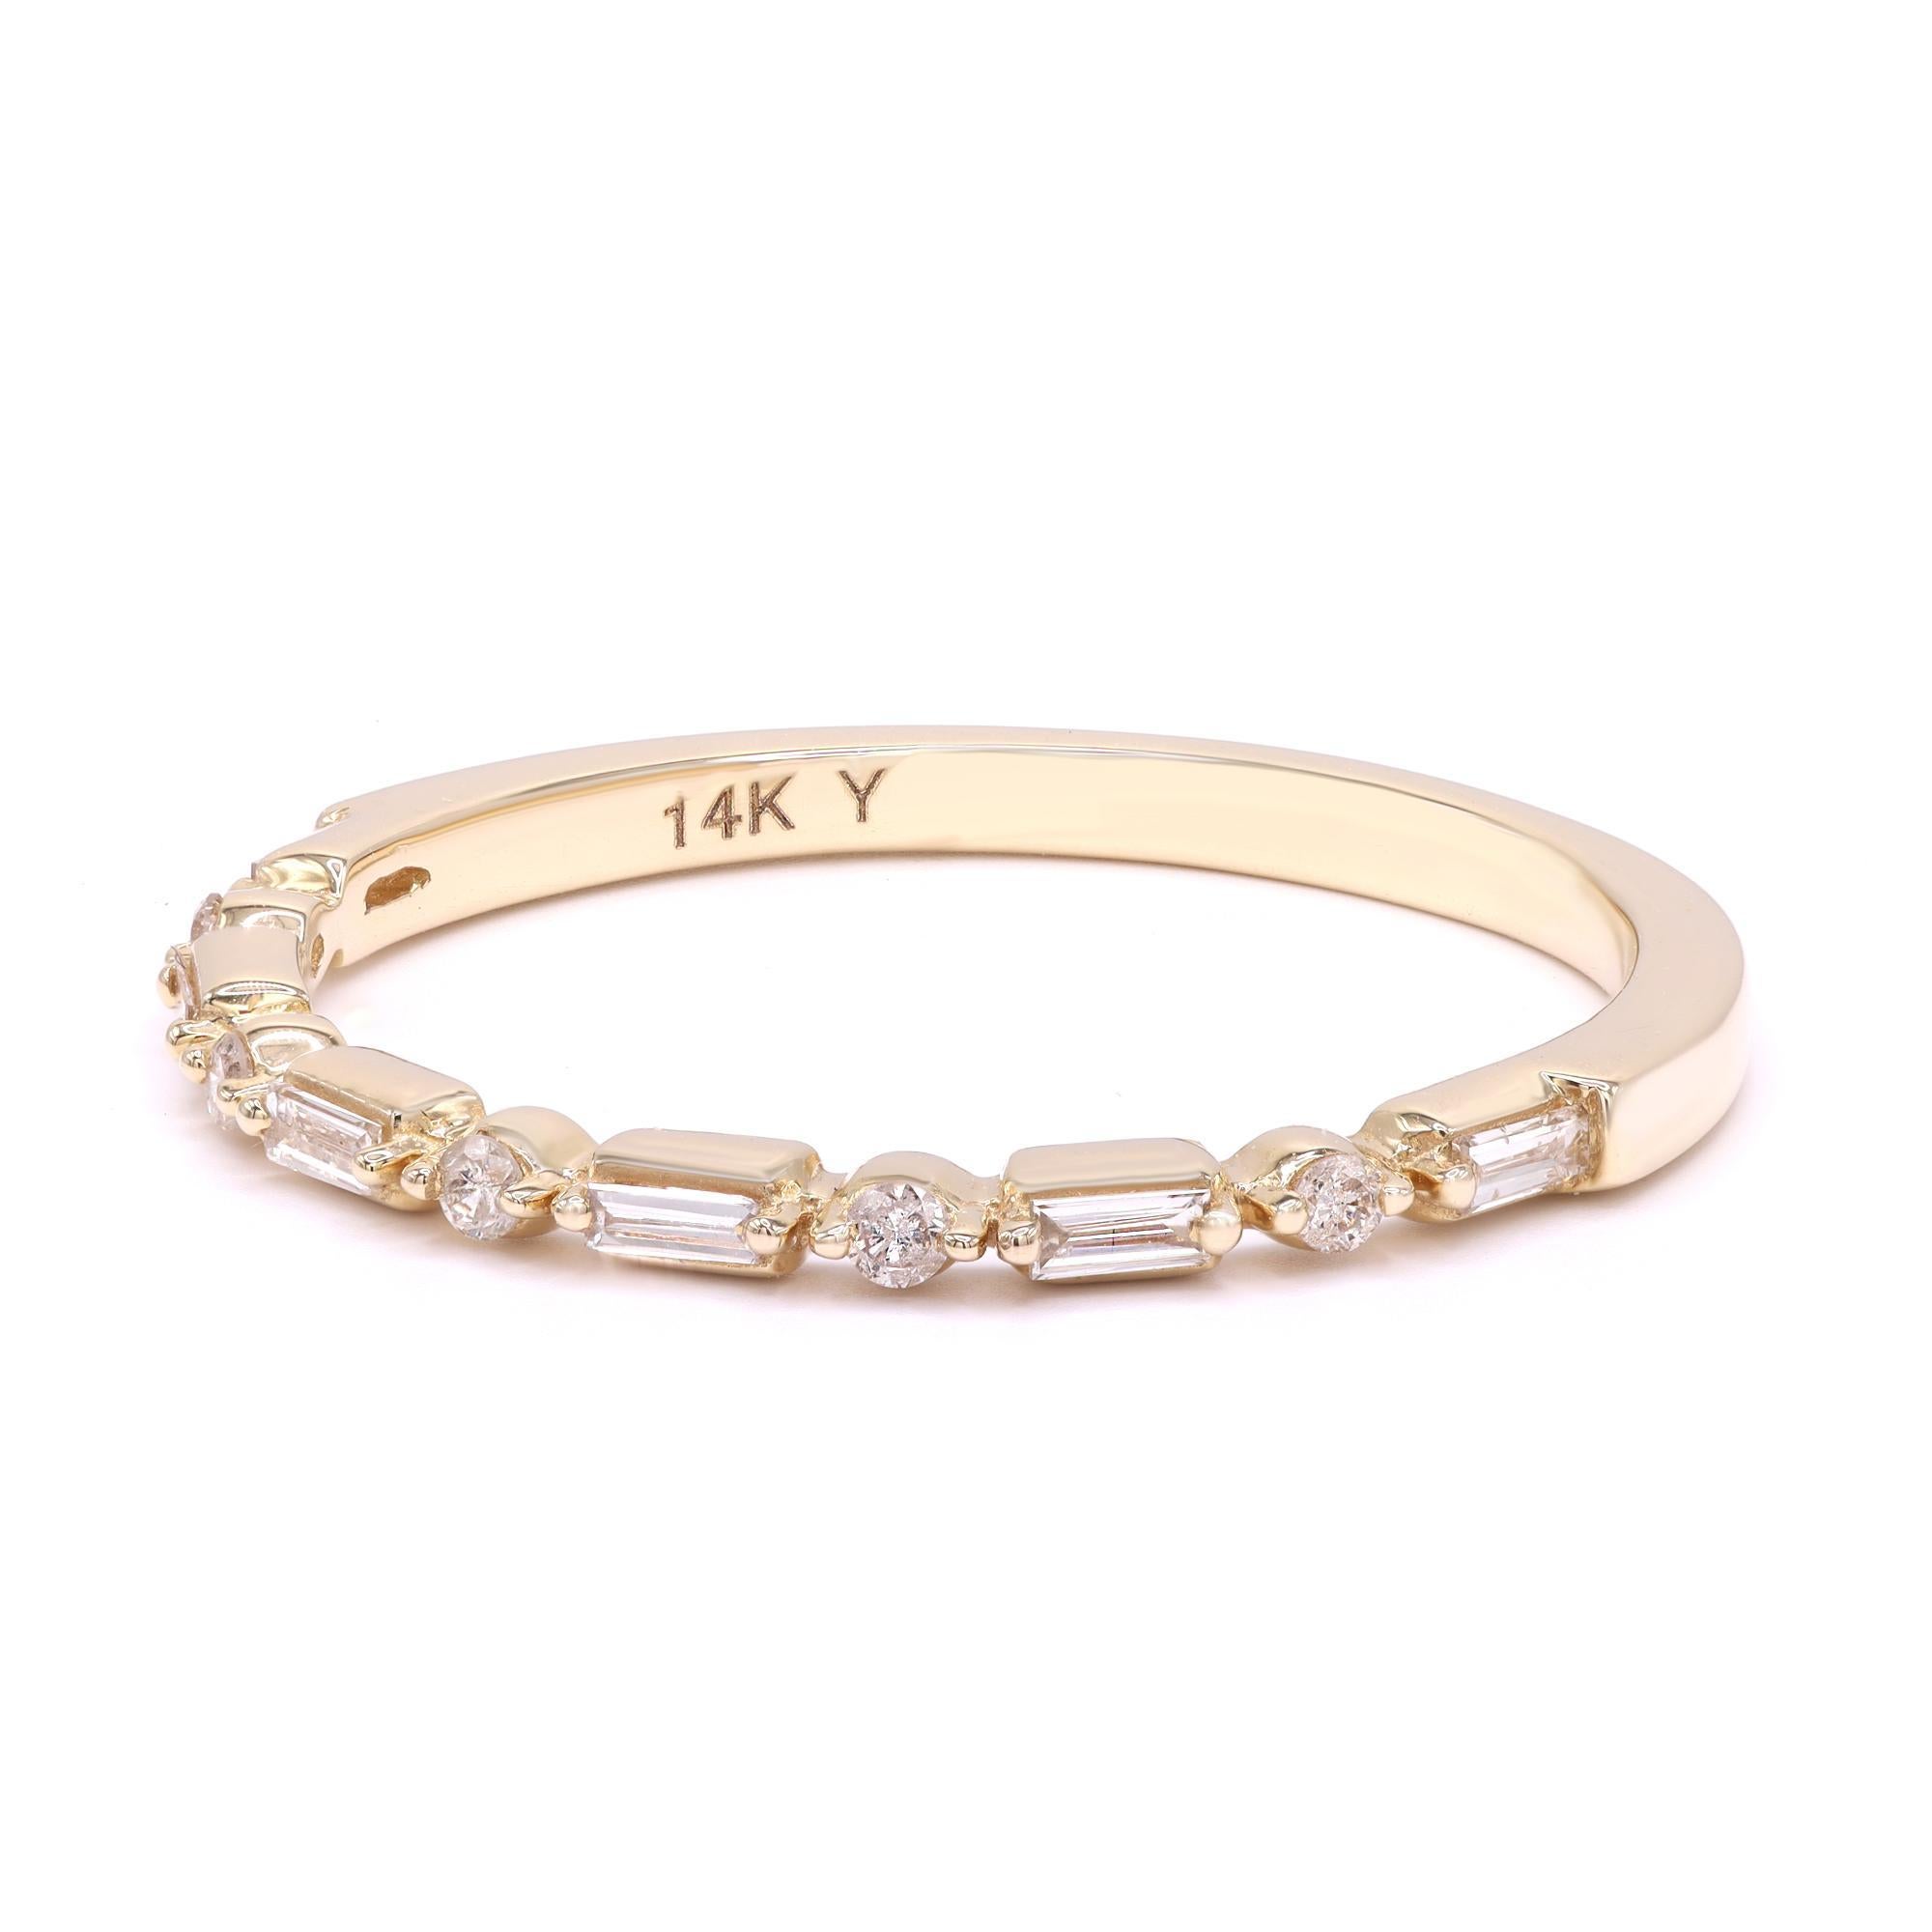 This beautiful diamond ring is a perfect fit for any occasion. Crafted in 14K yellow gold, it features round and baguette cut diamonds in prong setting. It's stackable and easy to mix and match. The total diamond weight is 0.154cts. Ring size 6.